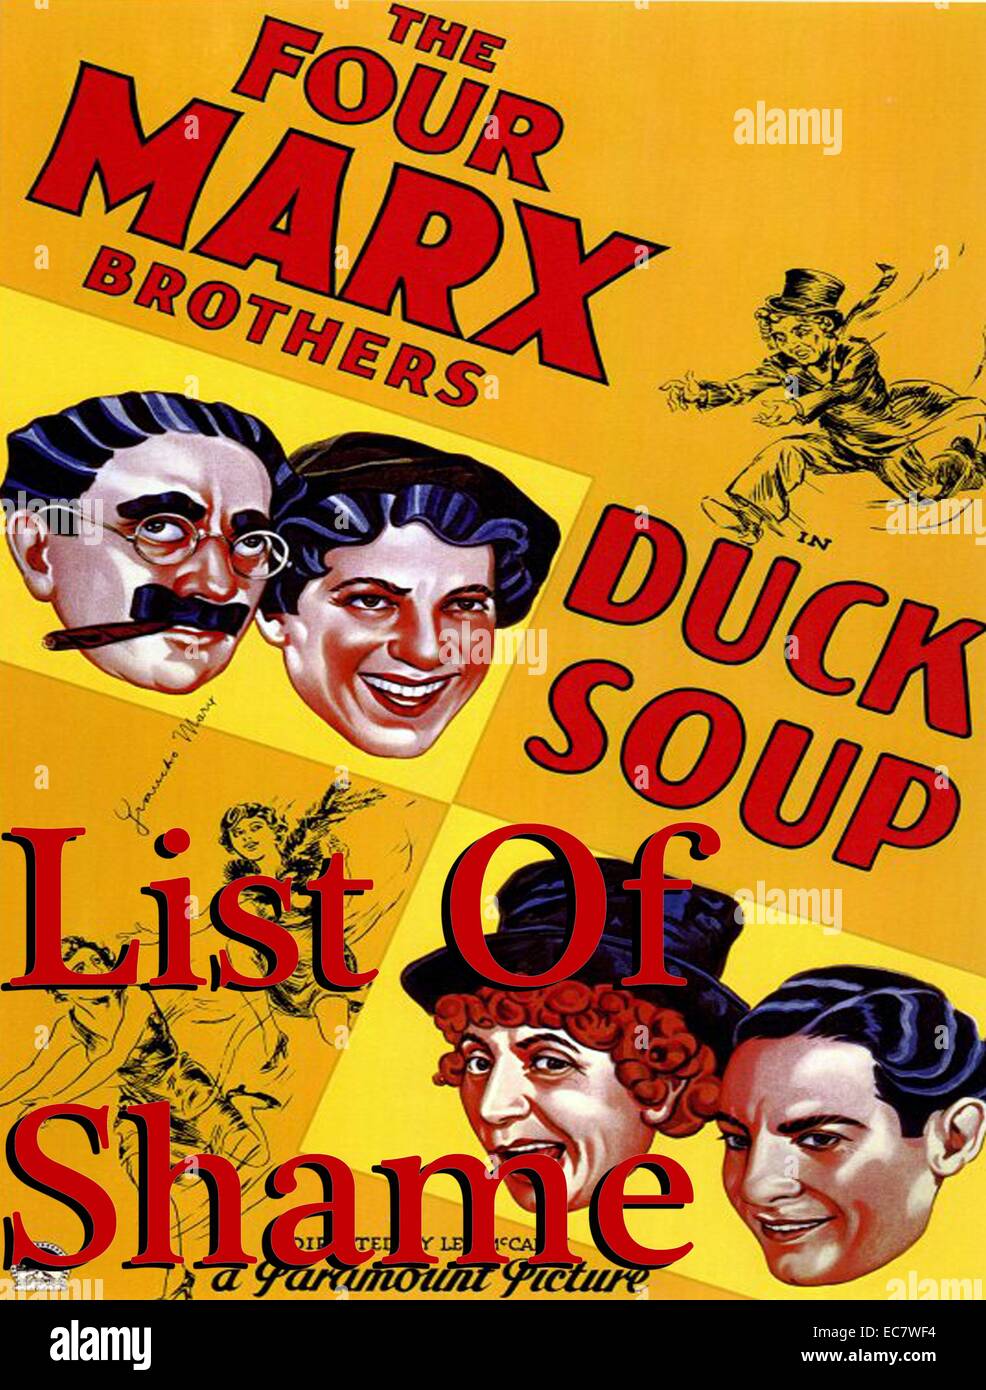 Duck Soup is a 1933 Marx Brothers anarchic comedy film written by Bert Kalmar and Harry Ruby and directed by Leo McCarey. It starred what were then billed as the 'Four Marx Brothers' (Groucho, Harpo, Chico, and Zeppo) and also featured Margaret Dumont and Edgar Kennedy. It was the last Marx Brothers film to feature Zeppo, and the last of five Marx Brothers movies released by Paramount Stock Photo